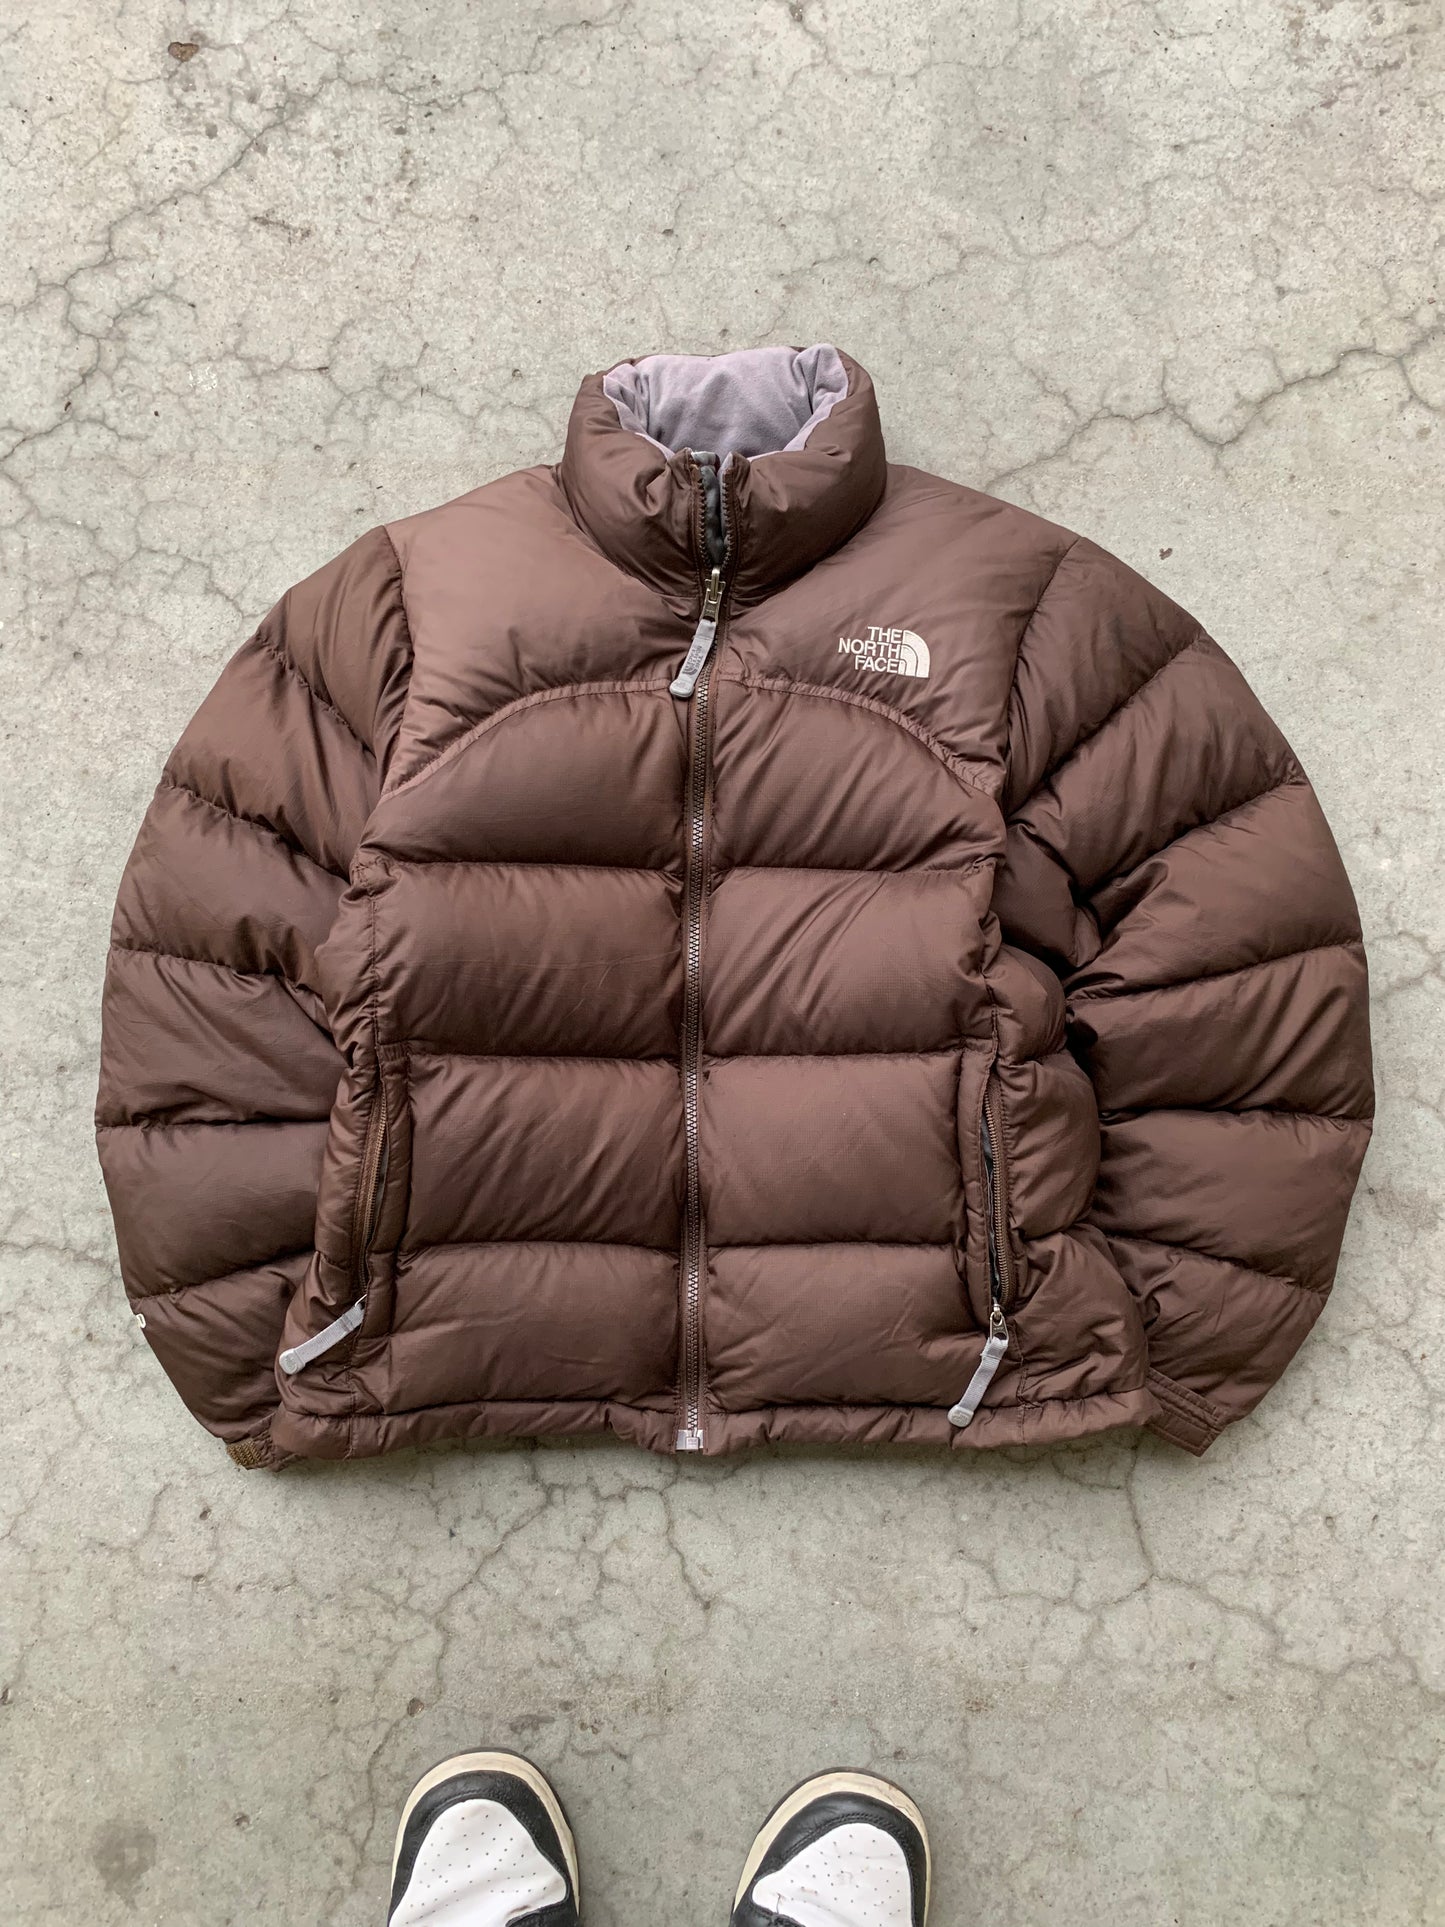 (S) The North Face 700 Choc Brown Puffer